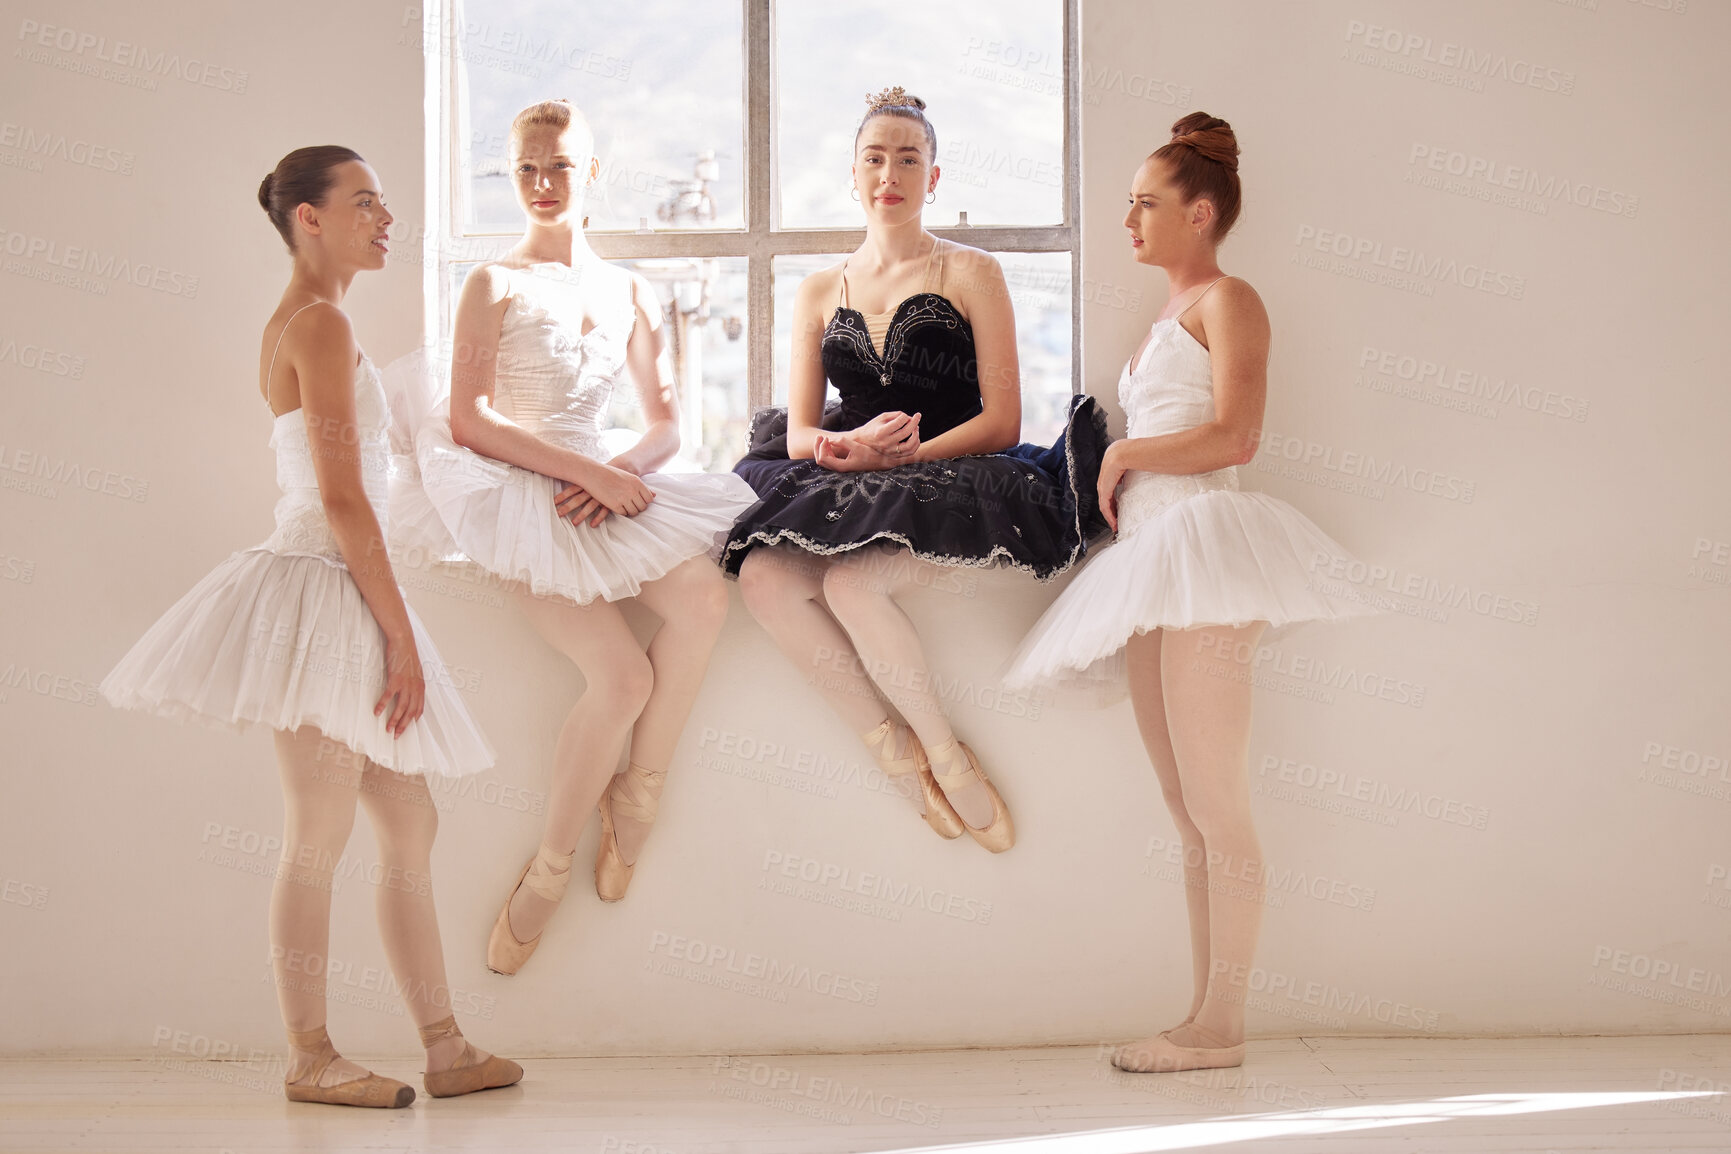 Buy stock photo Ballet students, communication or team talking on gym or studio floor about a competition. Portrait of a ballerina, academy and school workout or creative dance art, conversation and training


